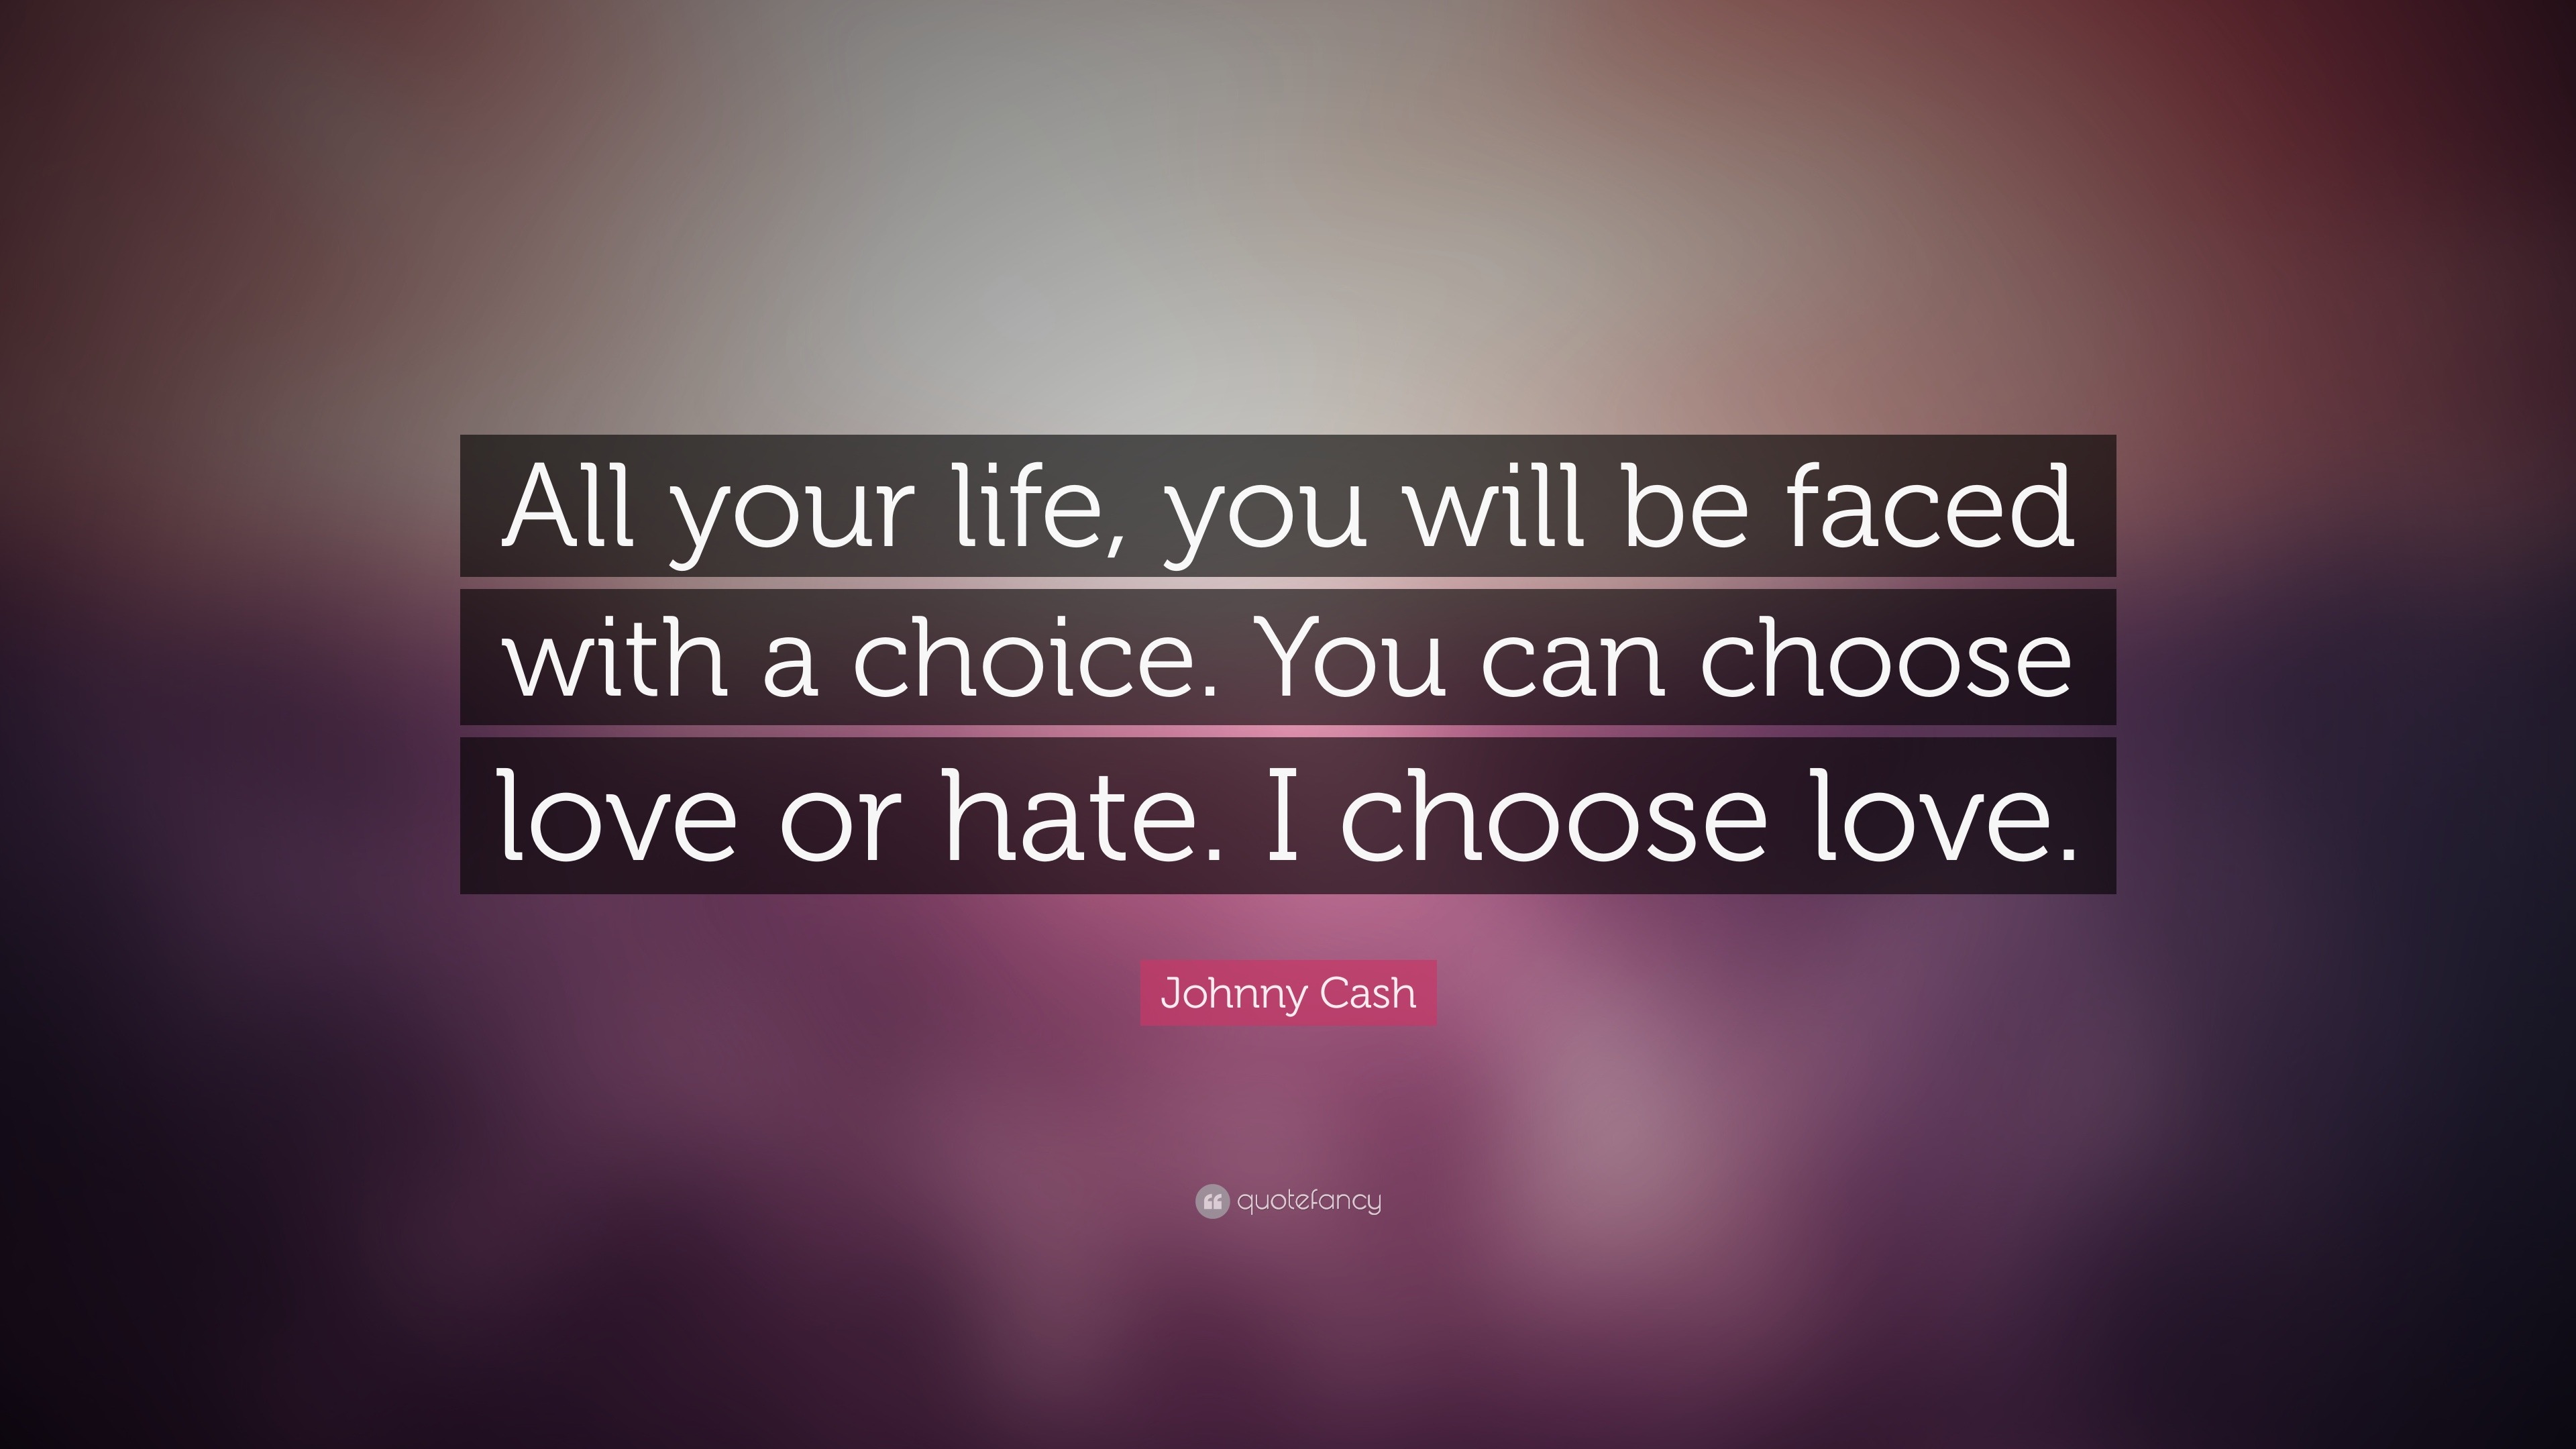 Johnny Cash Quote “All your life you will be faced with a choice